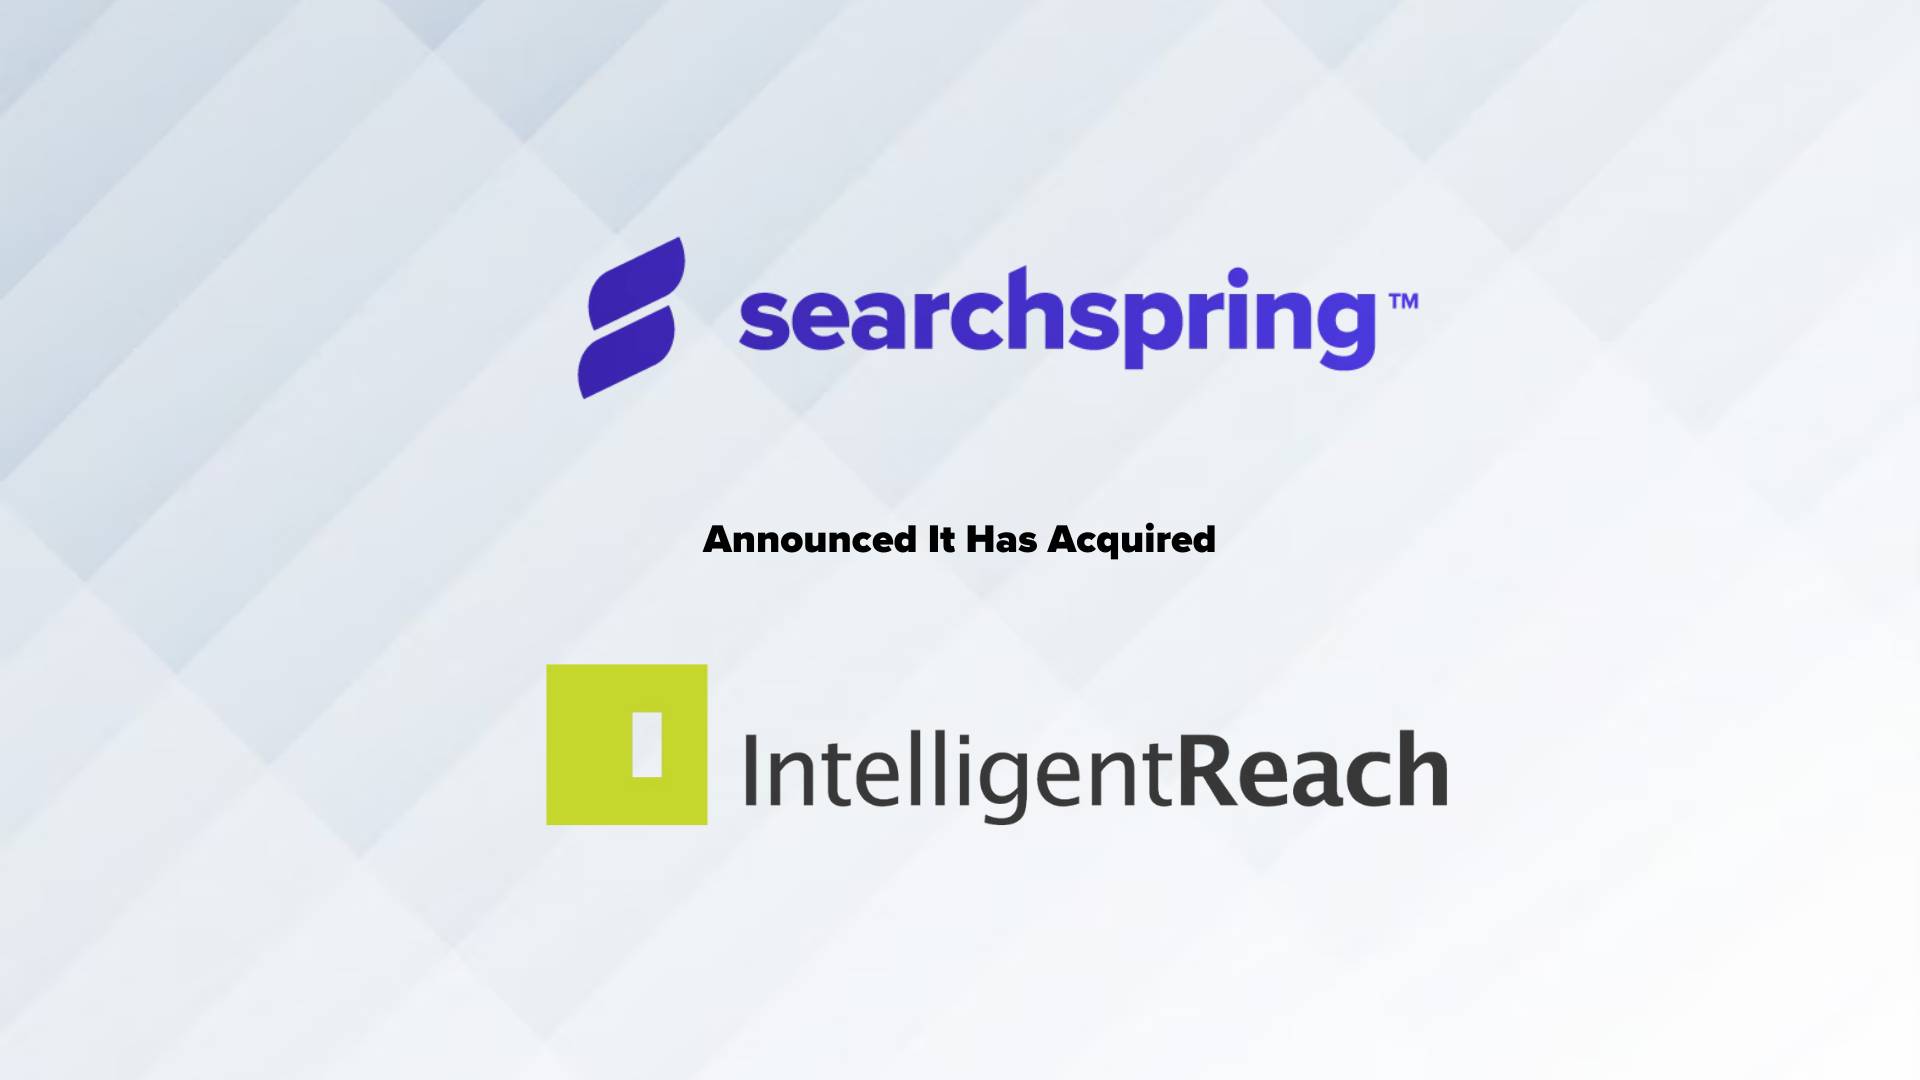 Searchspring Acquires Intelligent Reach to Strengthen its Position as a Top Global Conversion Optimization Platform